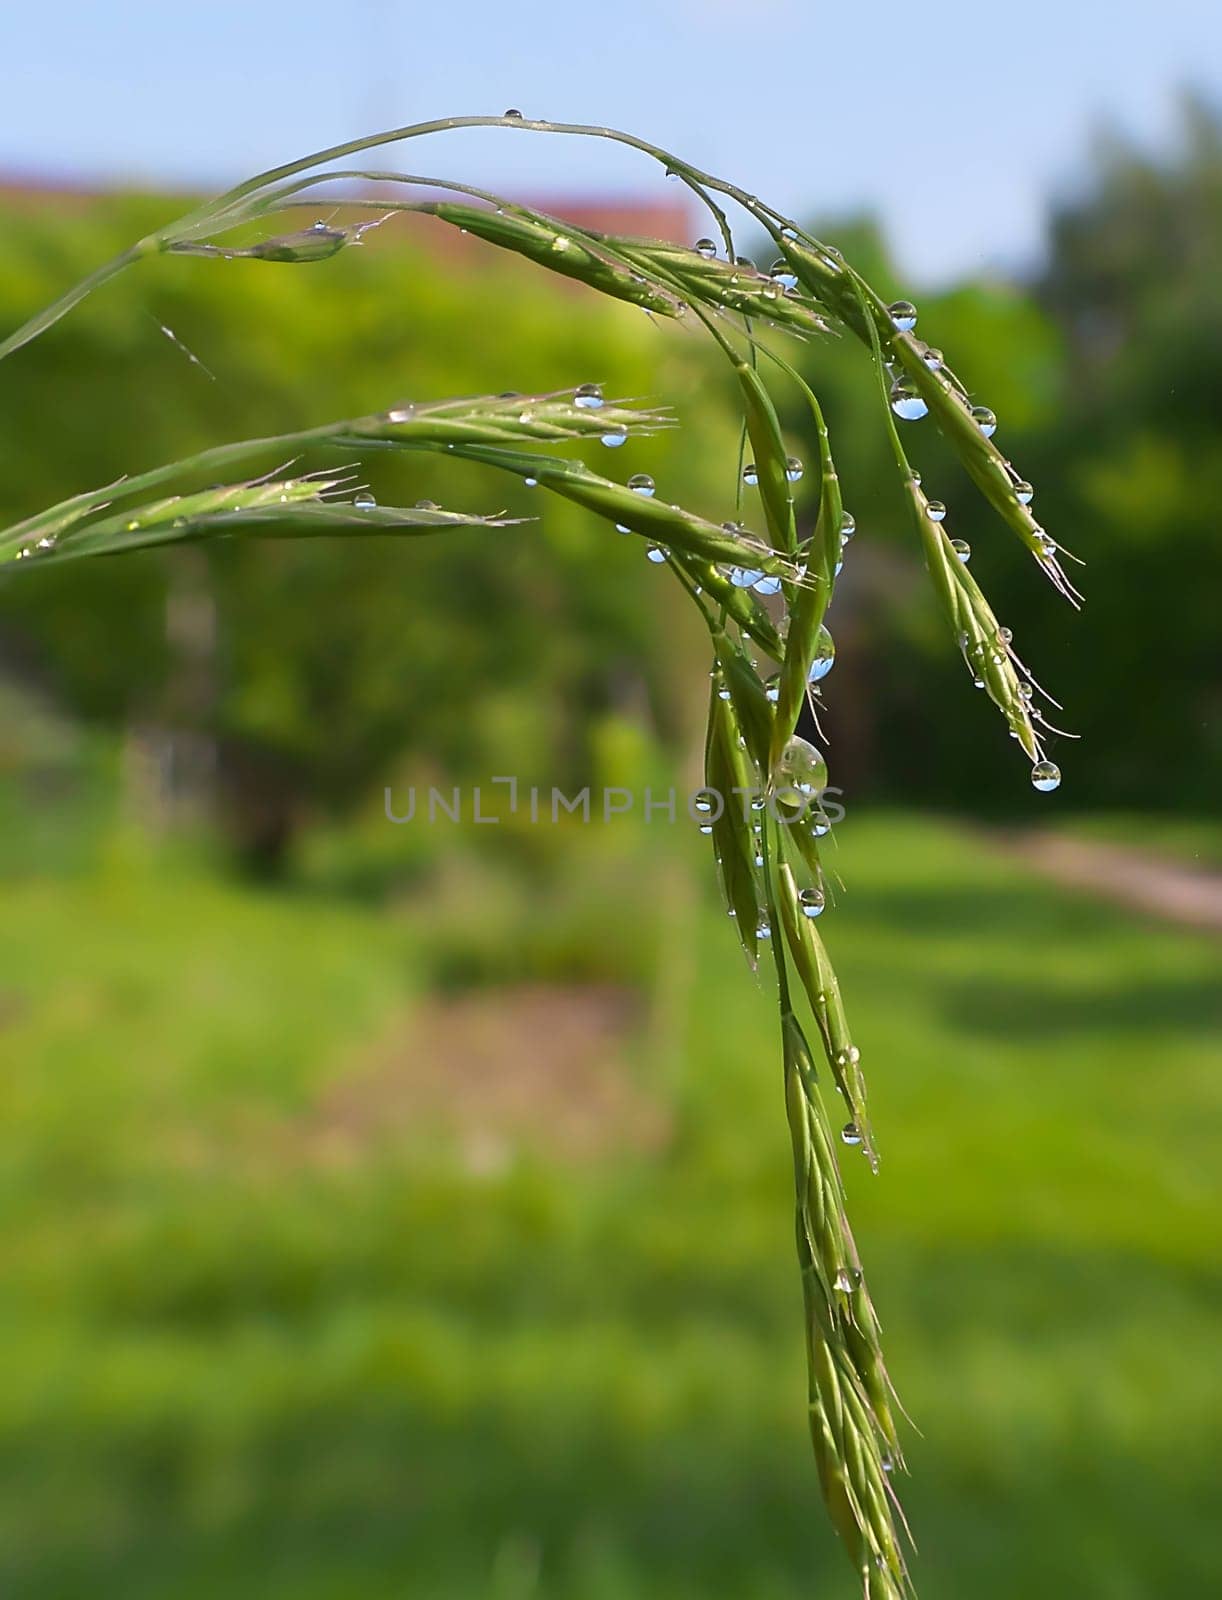 Glistening dewdrops adorn the fresh green blades of grass, creating a mesmerizing sight against the smudged green background, capturing the beauty of nature's delicate touch.